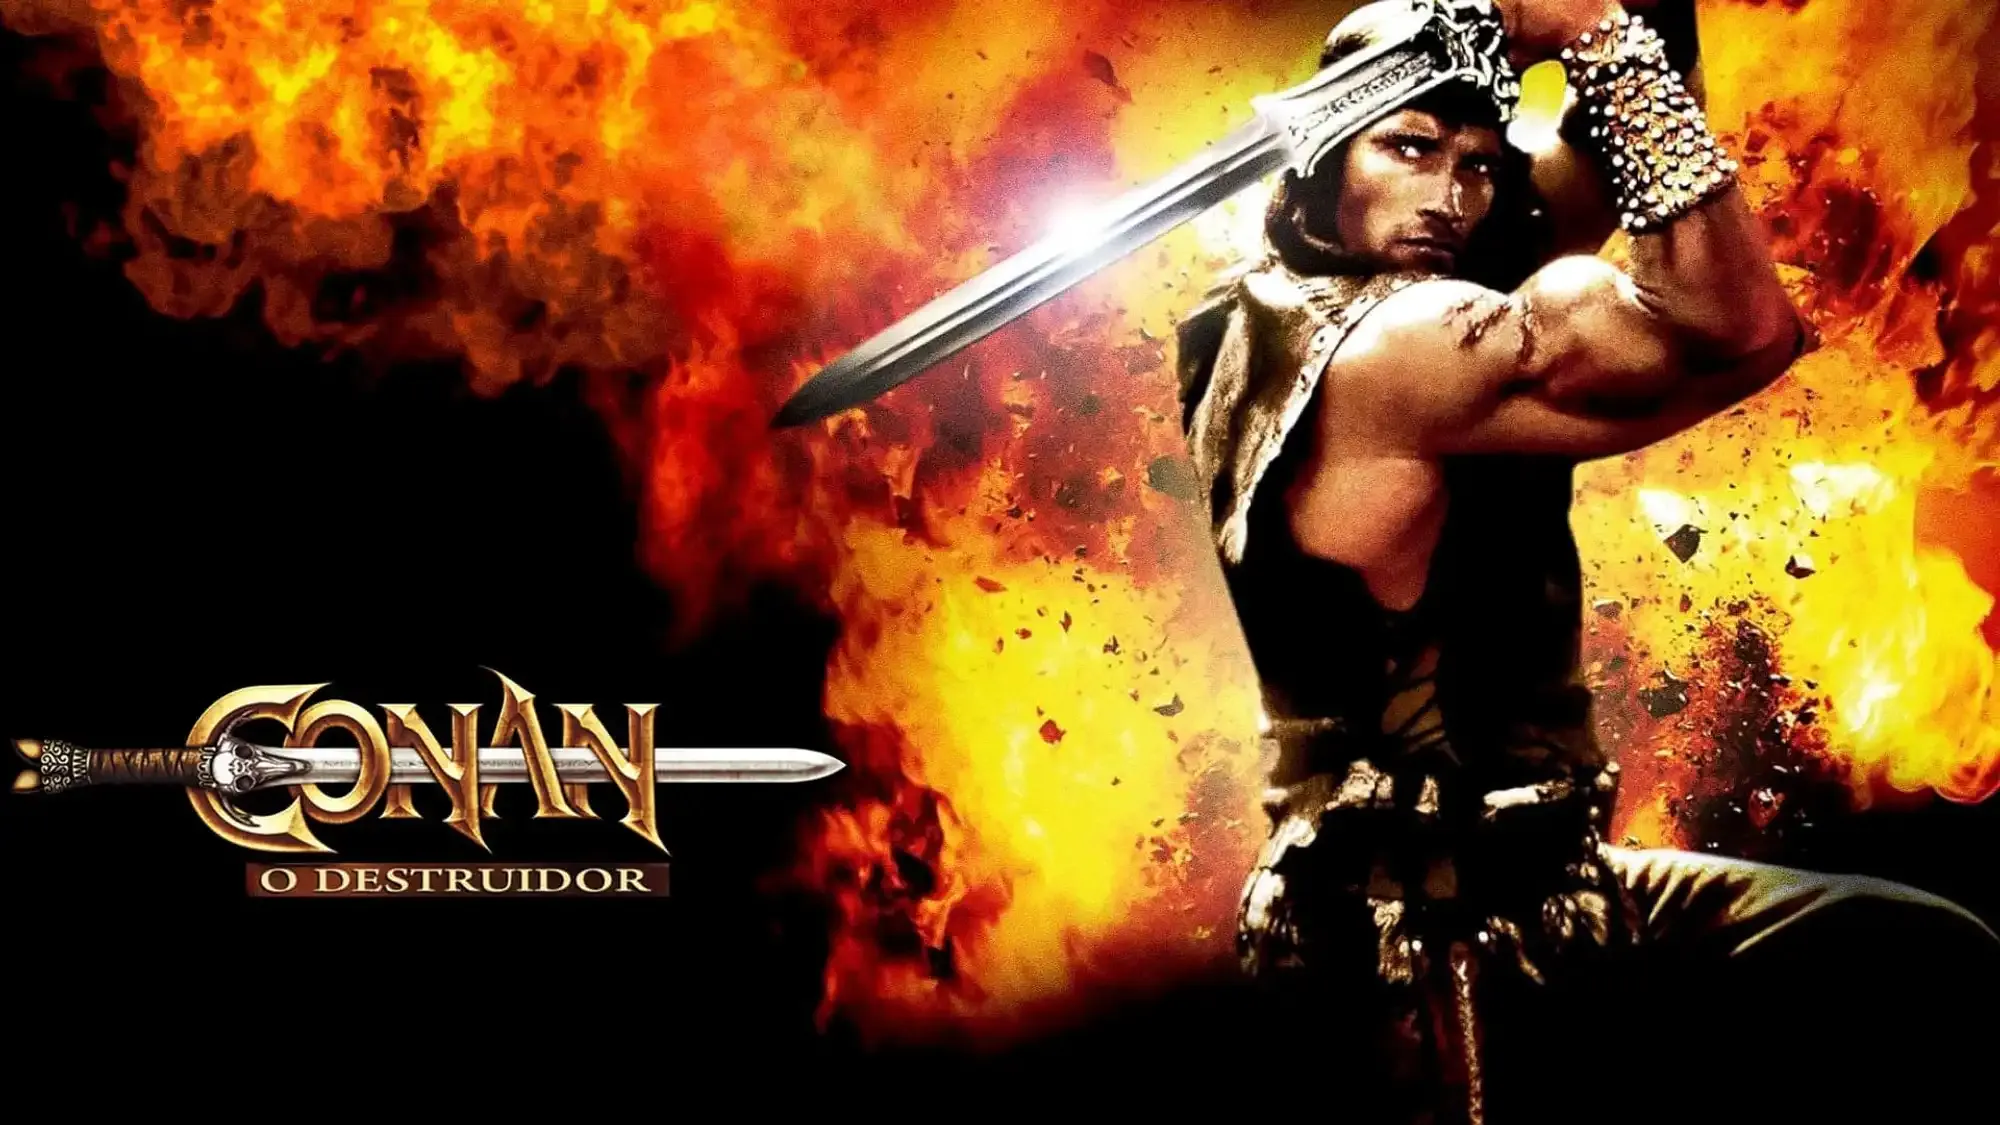 Conan the Destroyer movie review